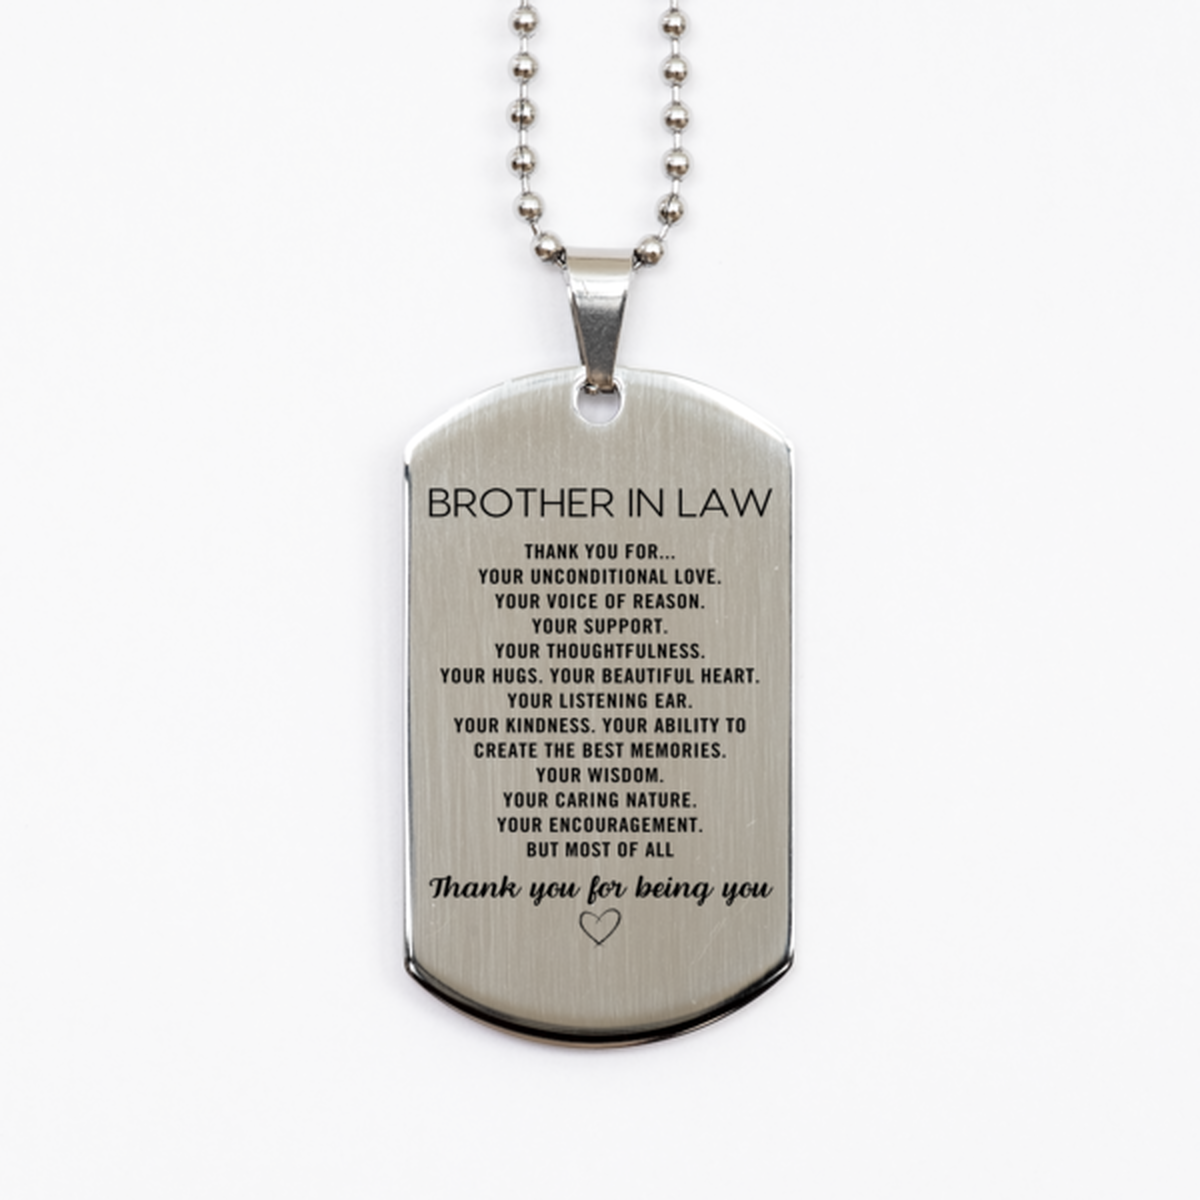 Brother In Law Silver Dog Tag Custom, Engraved Gifts For Brother In Law Christmas Graduation Birthday Gifts for Men Women Brother In Law Thank you for Your unconditional love